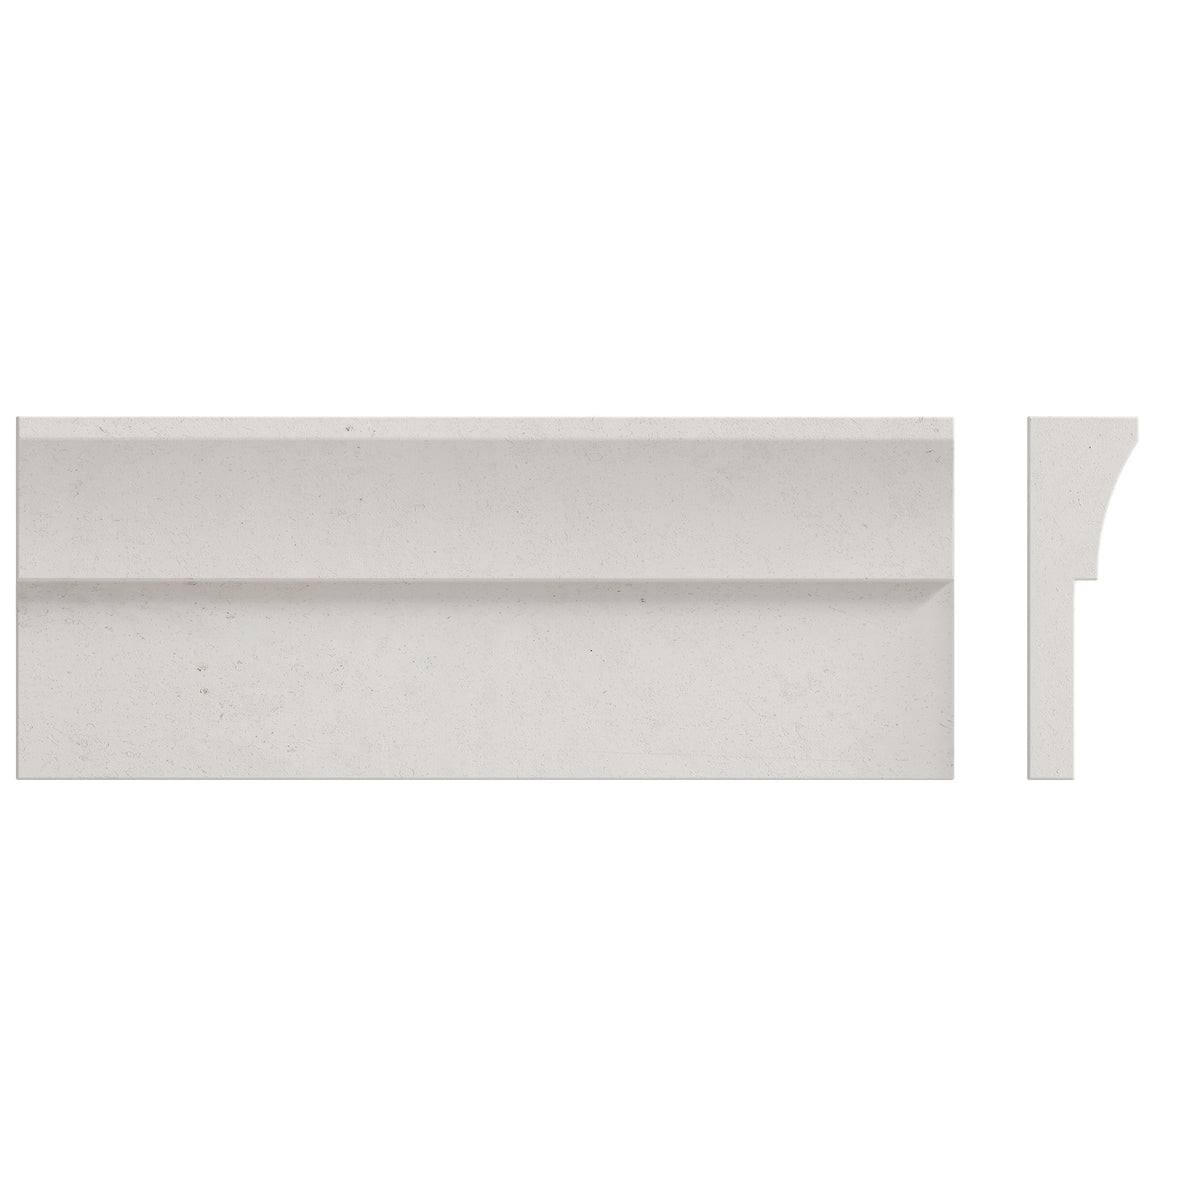 East Coast Family Crown Moulding Main Product Slider View